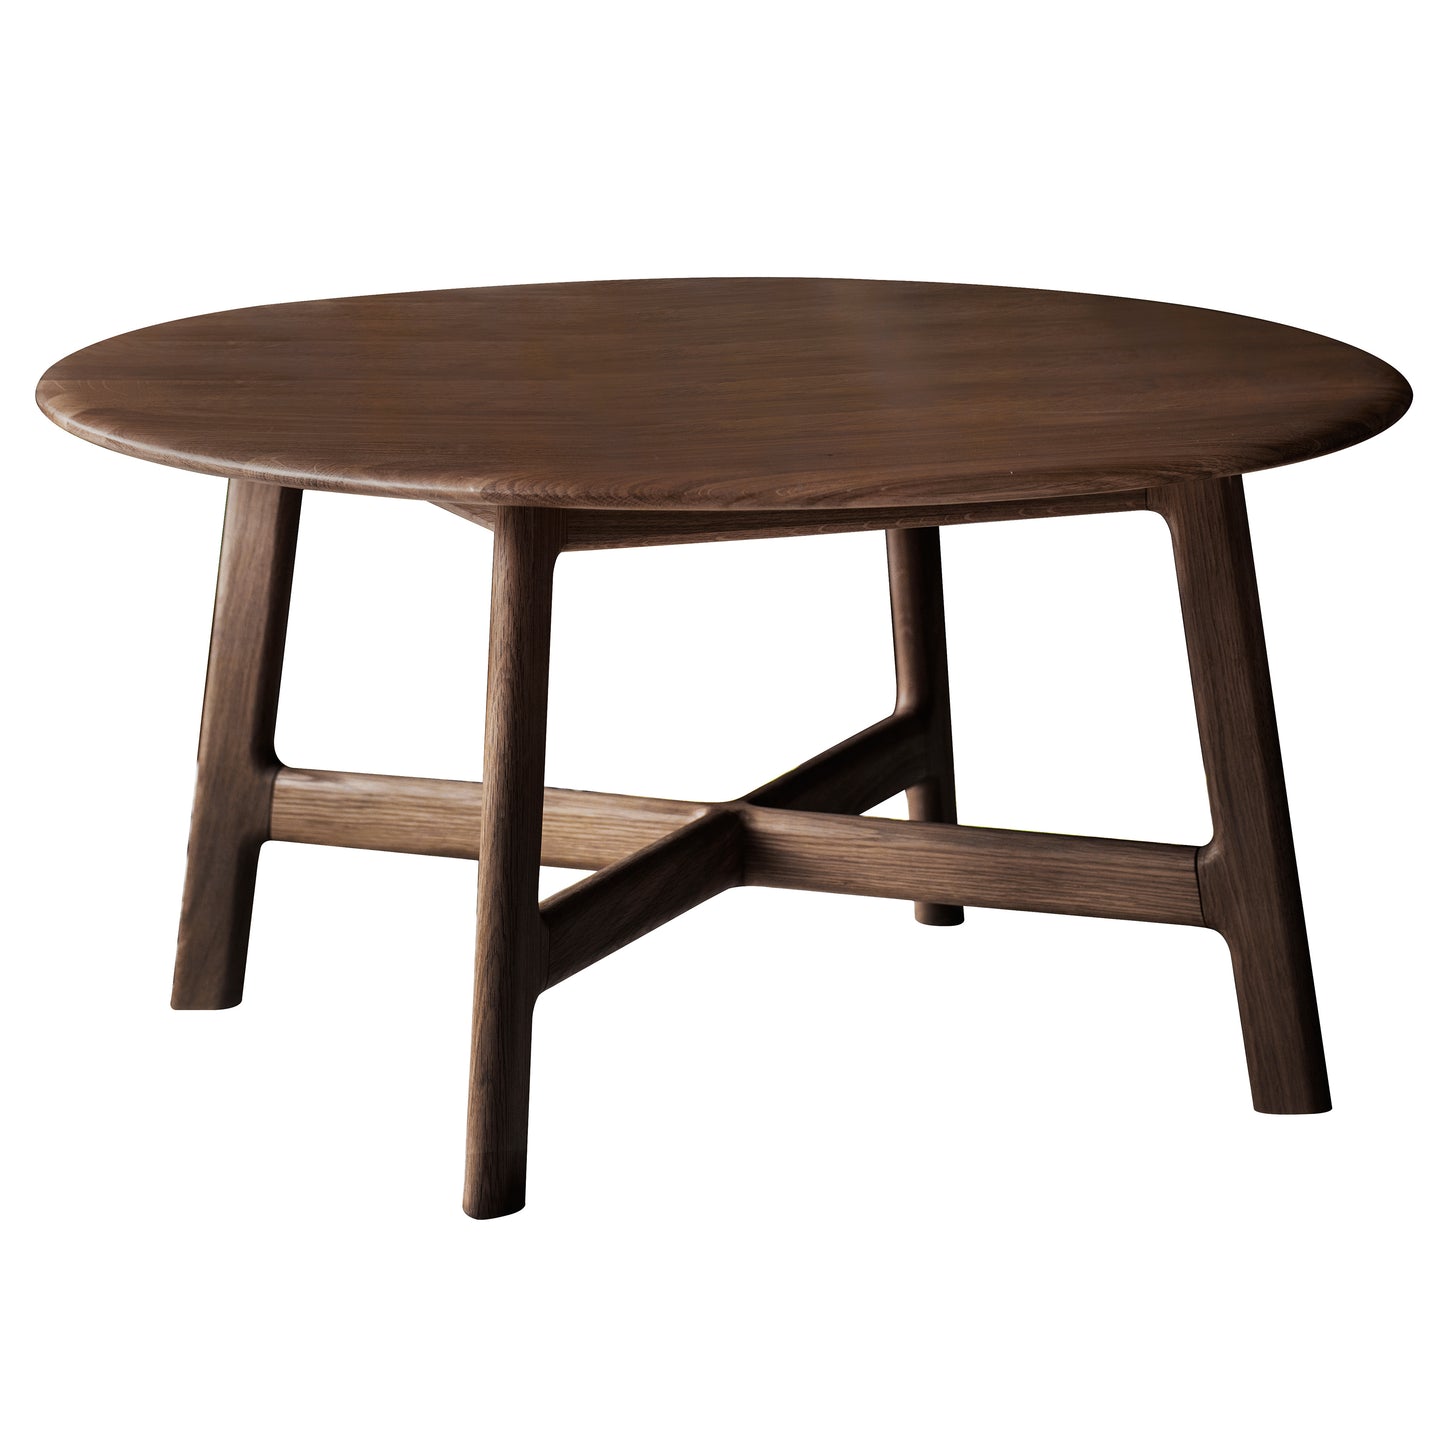 A Walnut coffee table with a wooden base for interior decor and home furniture.